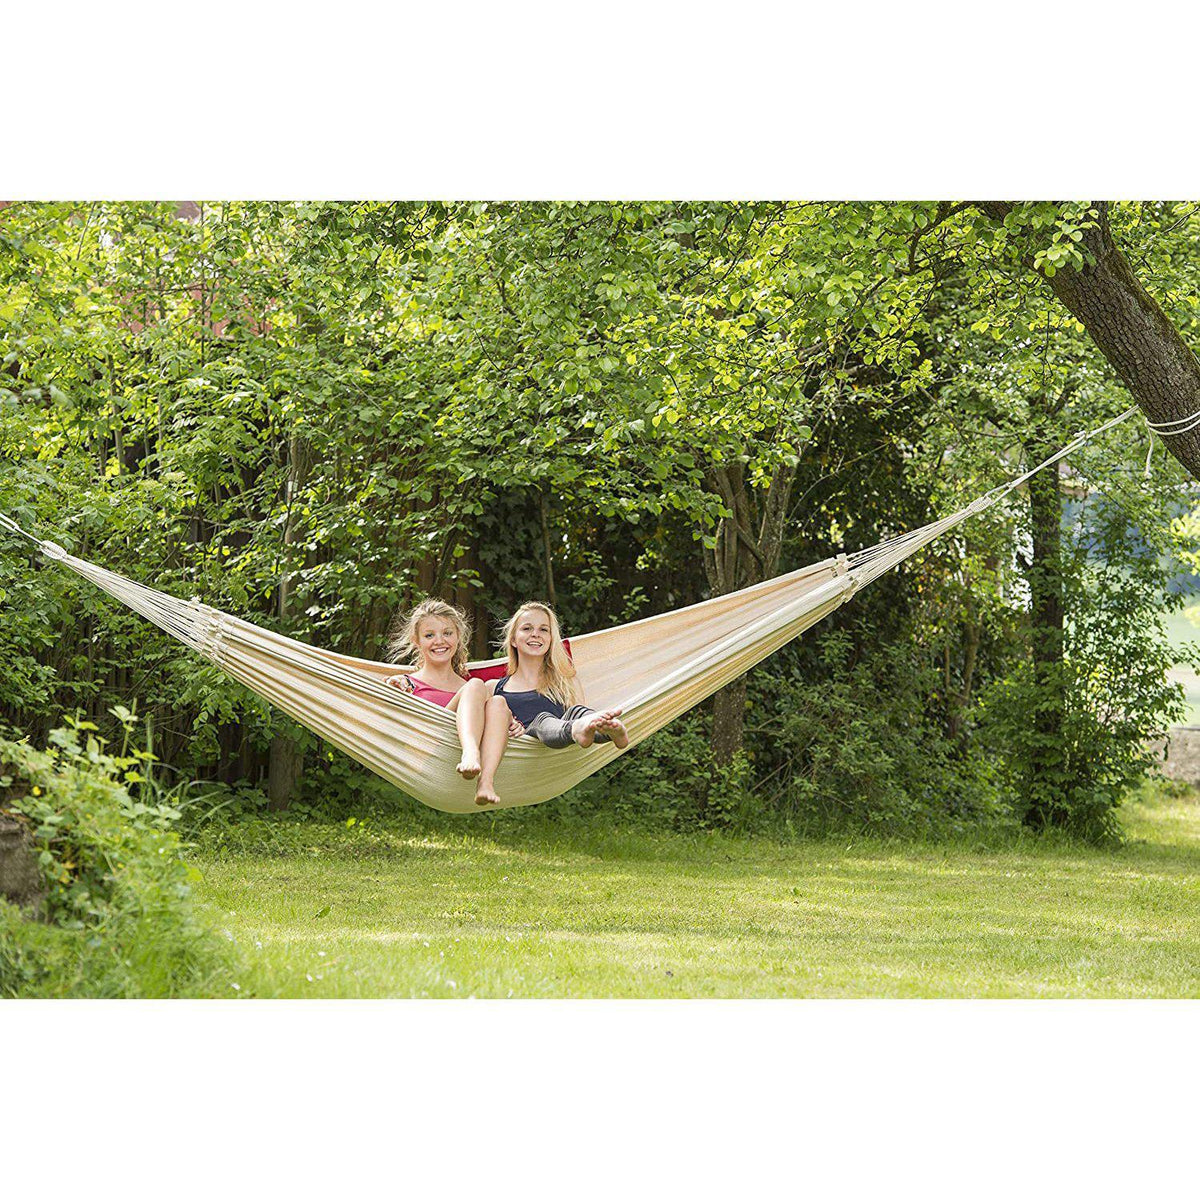 Paradiso Hammock Double, from Byer of Maine